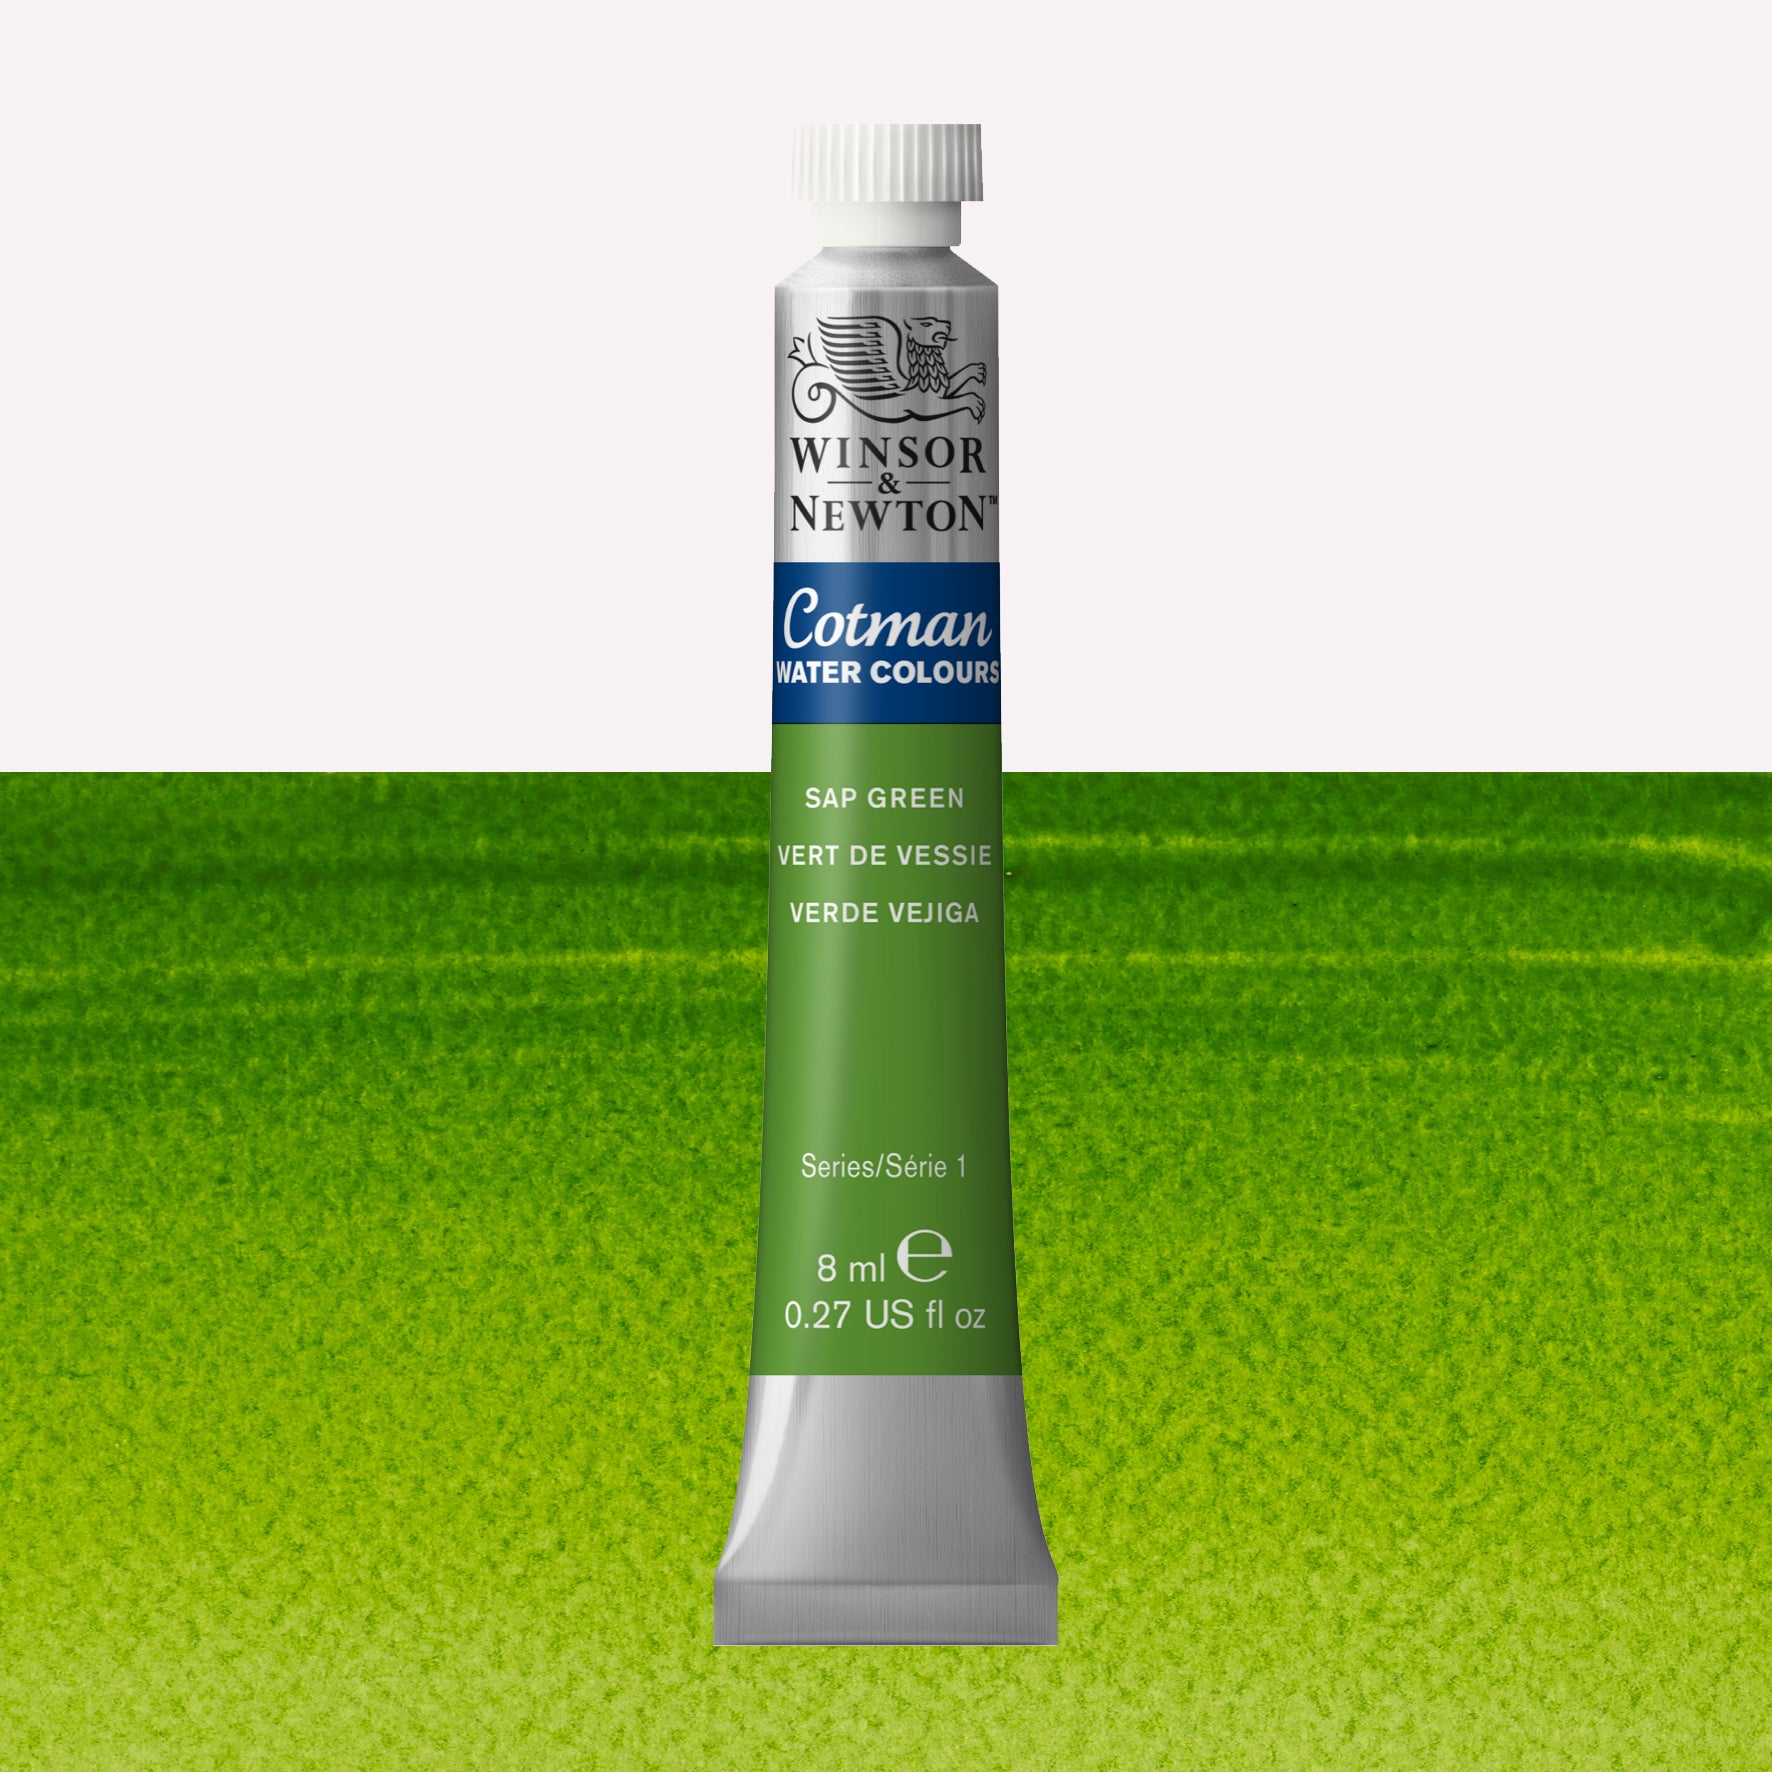 Winsor & Newton Cotman watercolour paint packaged in 8ml silver tube with a white lid in the shade Sap Green over a highly pigmented colour swatch.